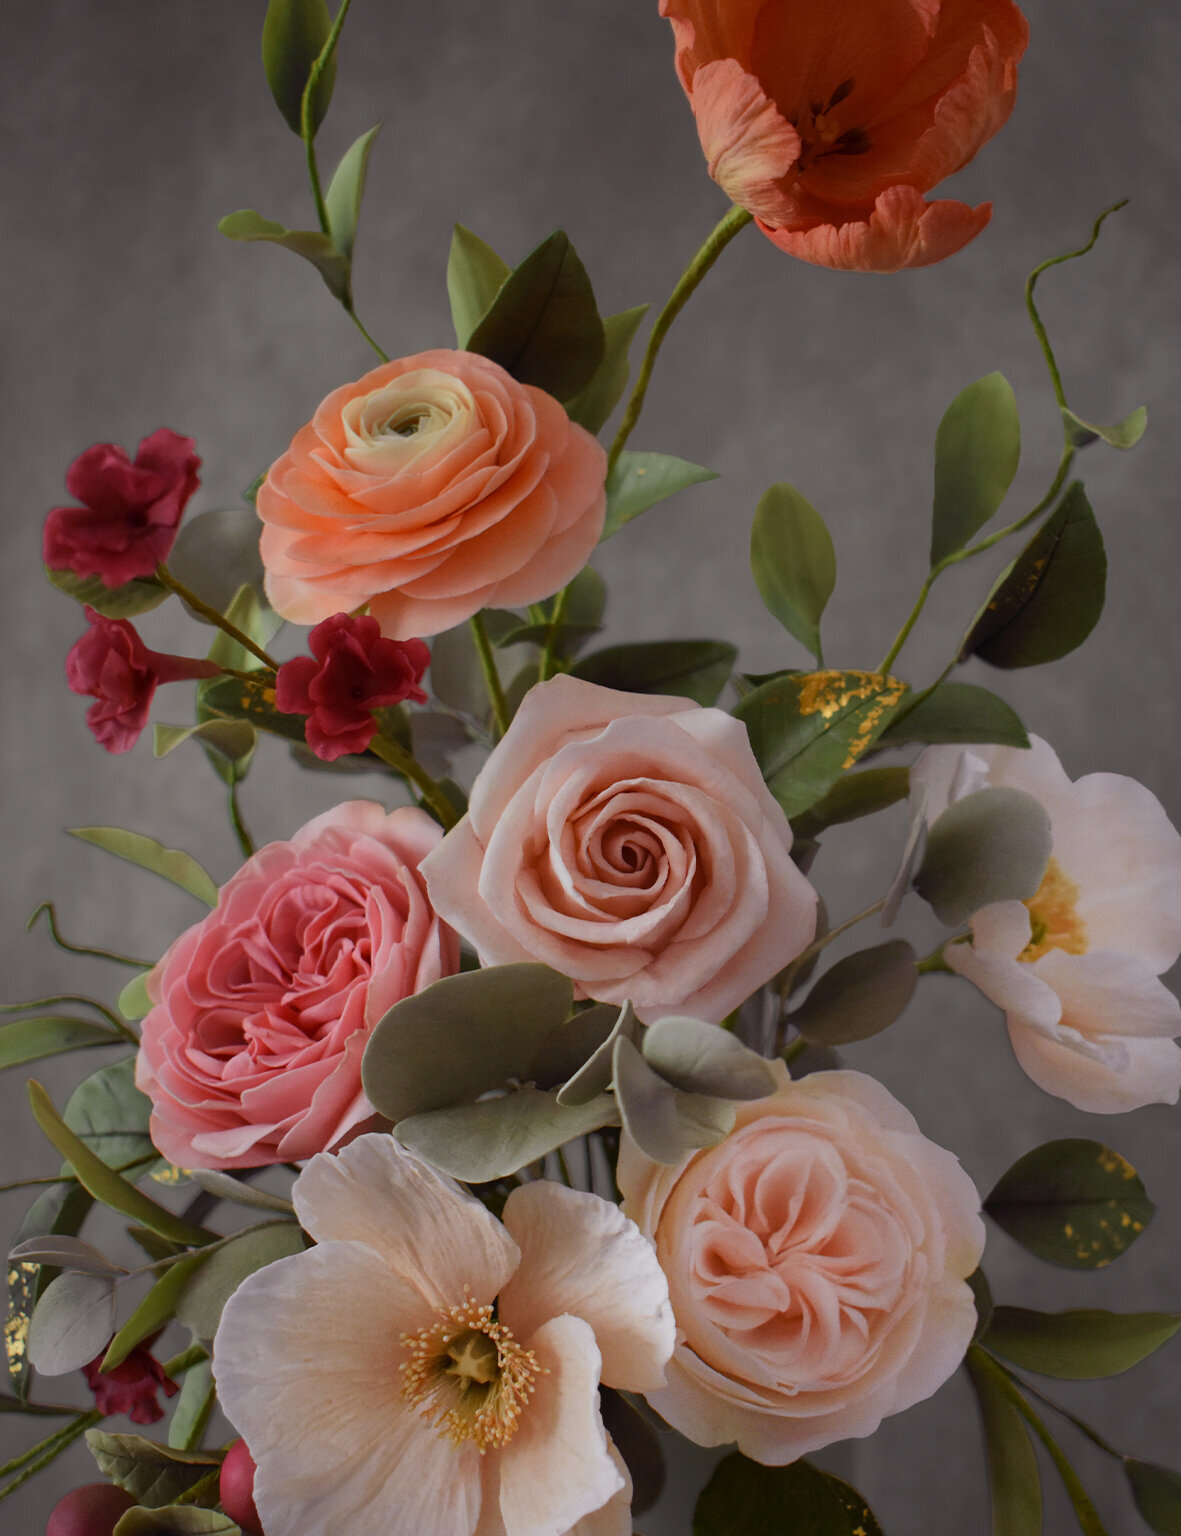 Closeup of sugar flowers including orange parrot tulips, peach ranunculus, pale pink garden roses and an icelandic poppy  with moody background